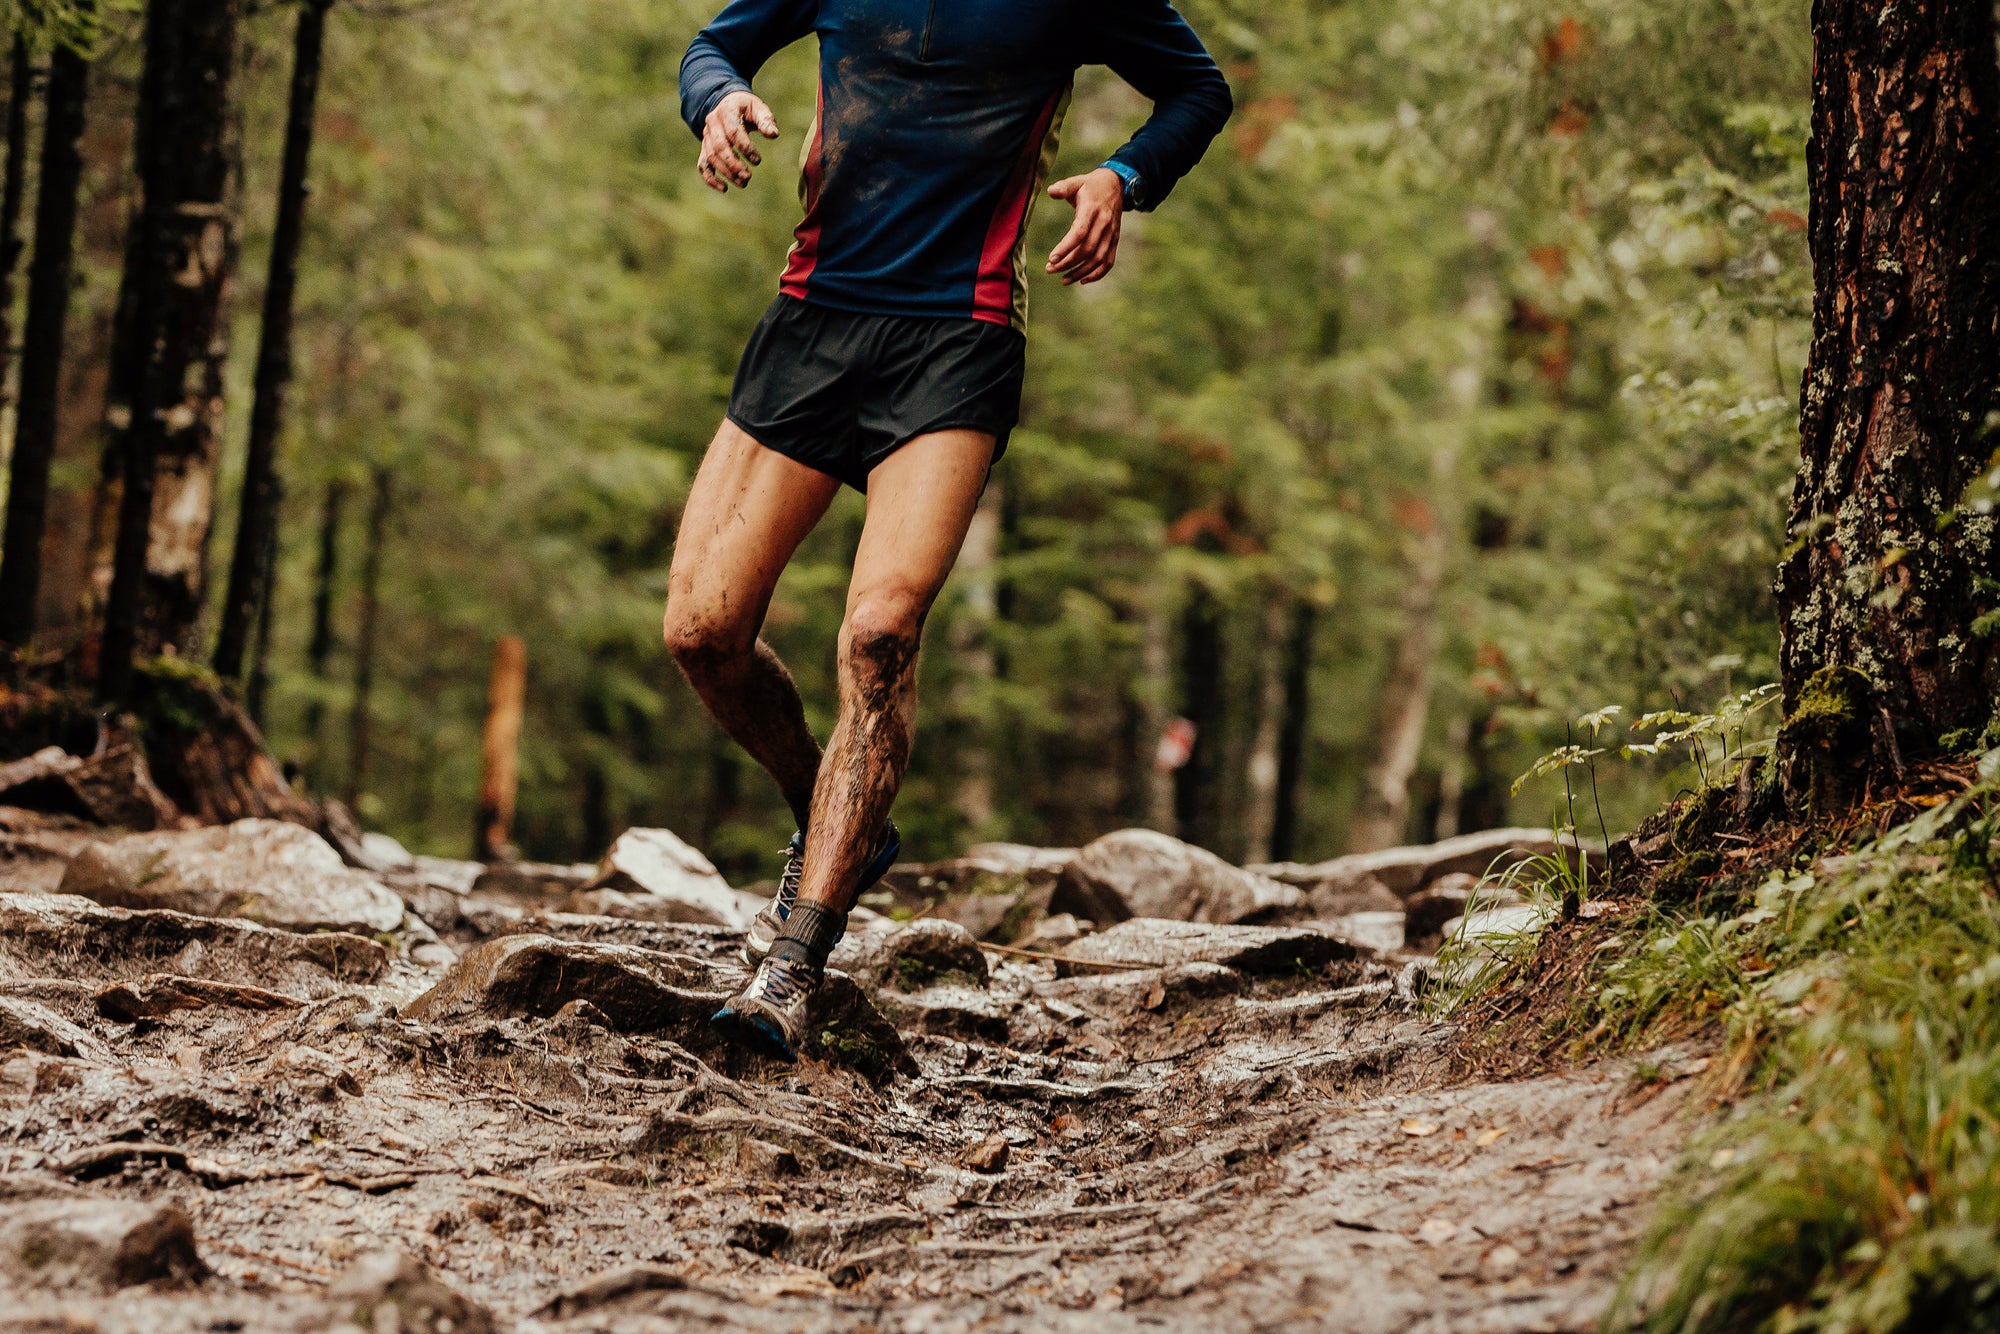 Choose the right running shoes for wet, muddy conditions